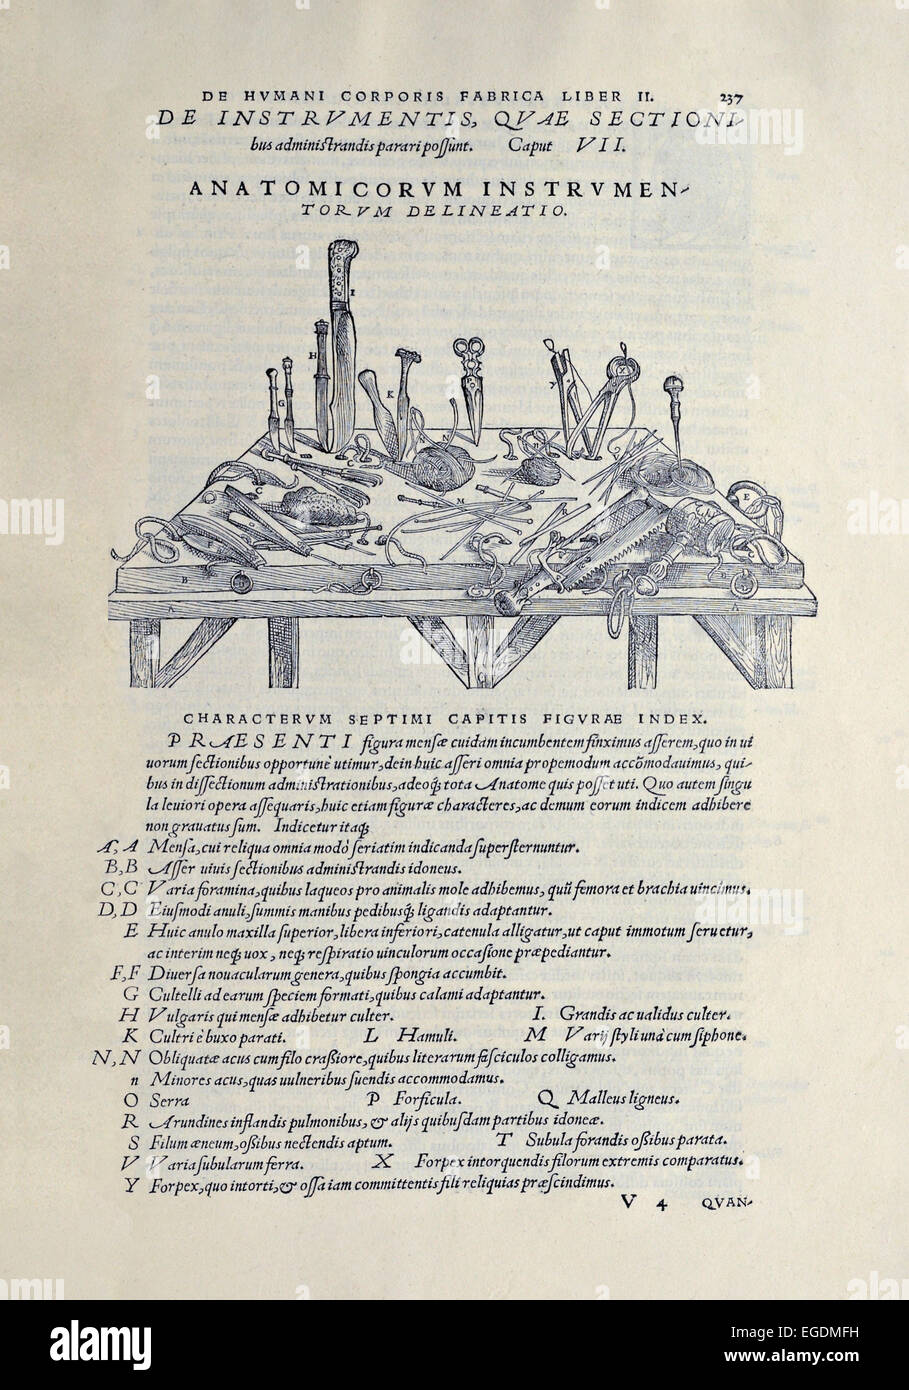 Surgical instruments used in the dissection of cadavers to understand human anatomy. From 'De humani corporis fabrica libri septem' by Andreas Vesalius (1514-1564) published in 1543. See description for more information. Stock Photo